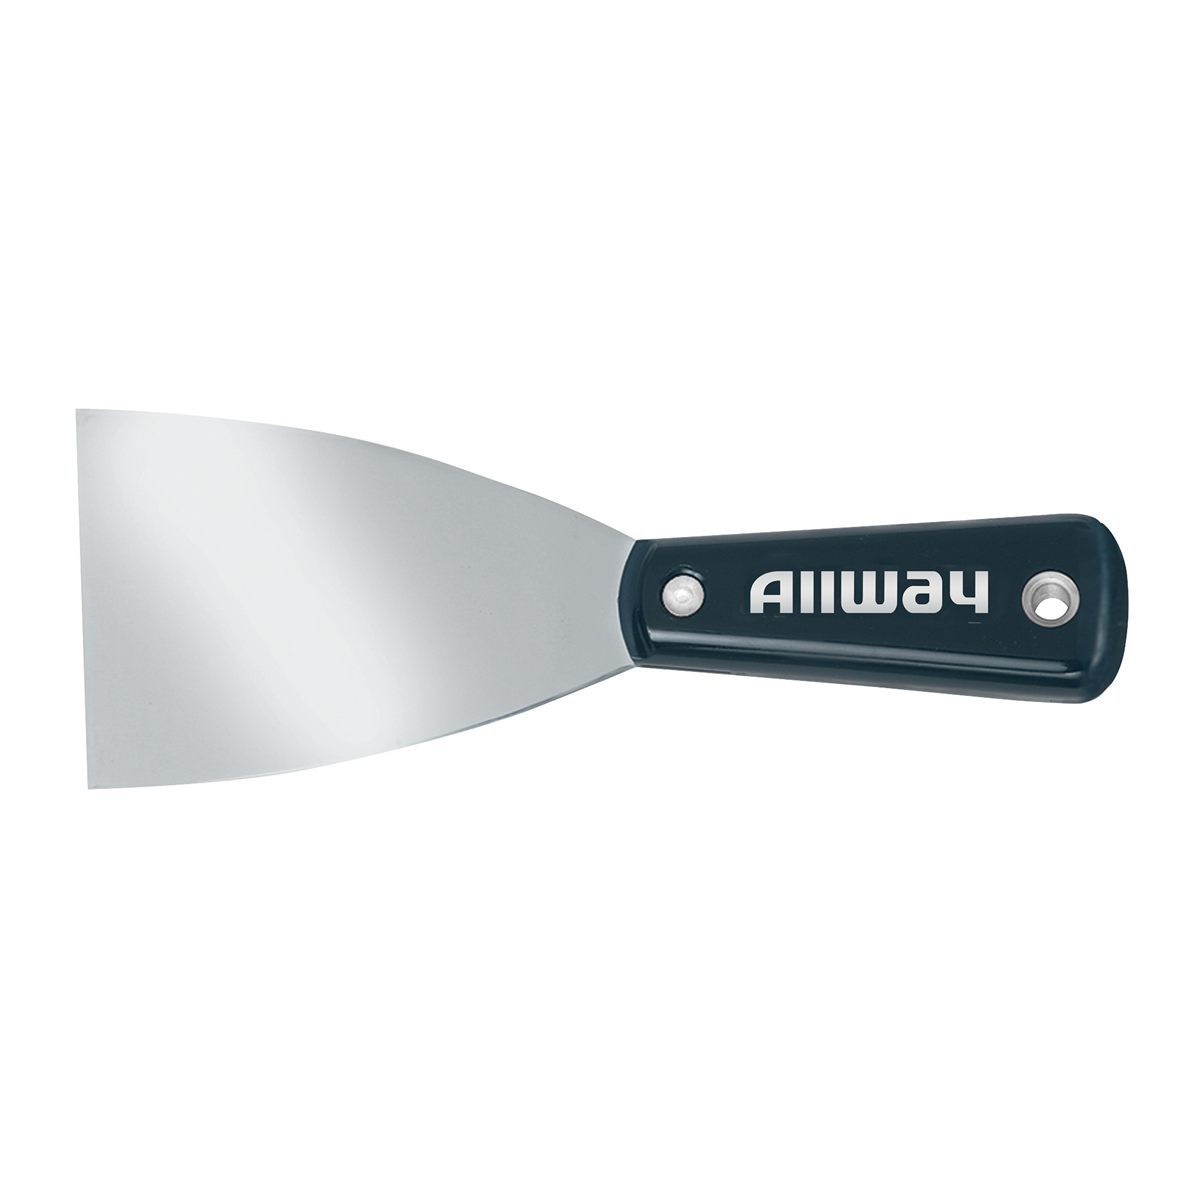 X3S) 3 Stiff Nylon Handle Wall Scraper, Labelled » ALLWAY® The Tools You  Ask For By Name